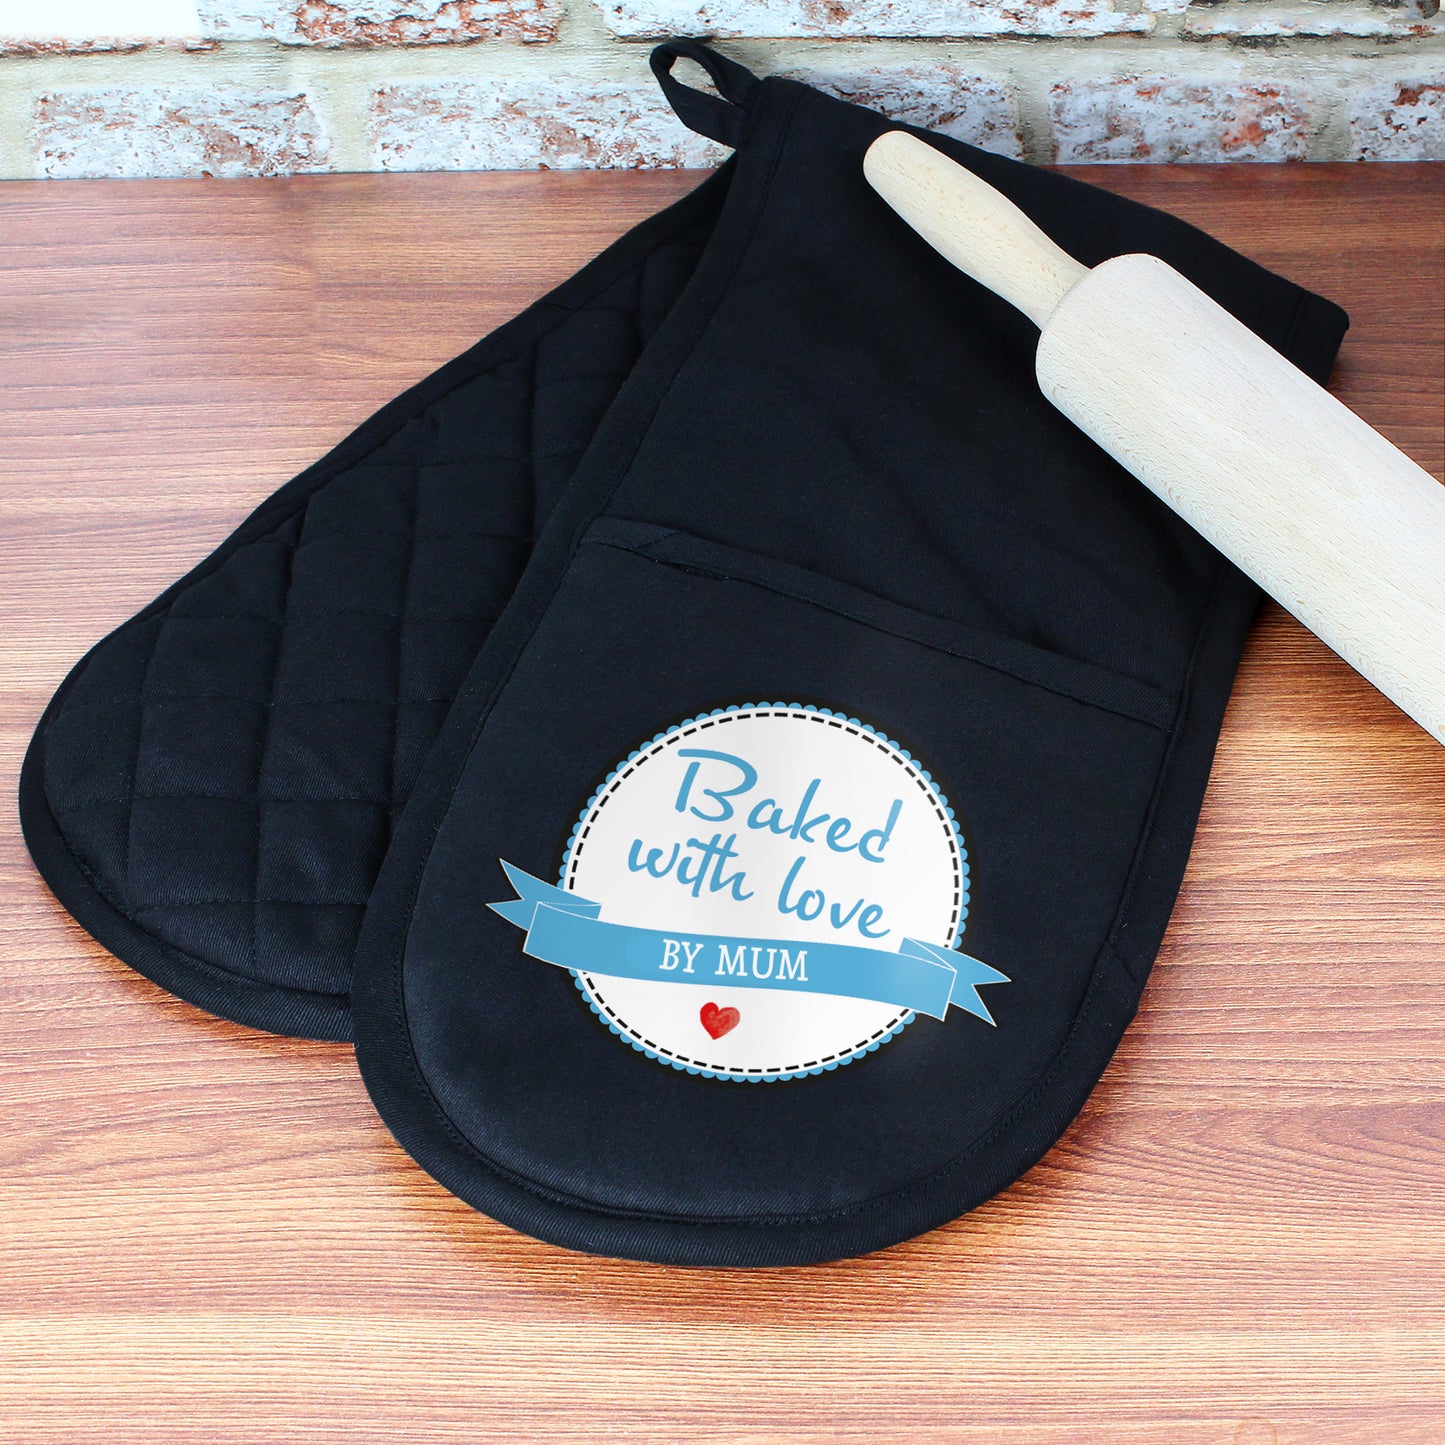 Personalised Black Oven Gloves